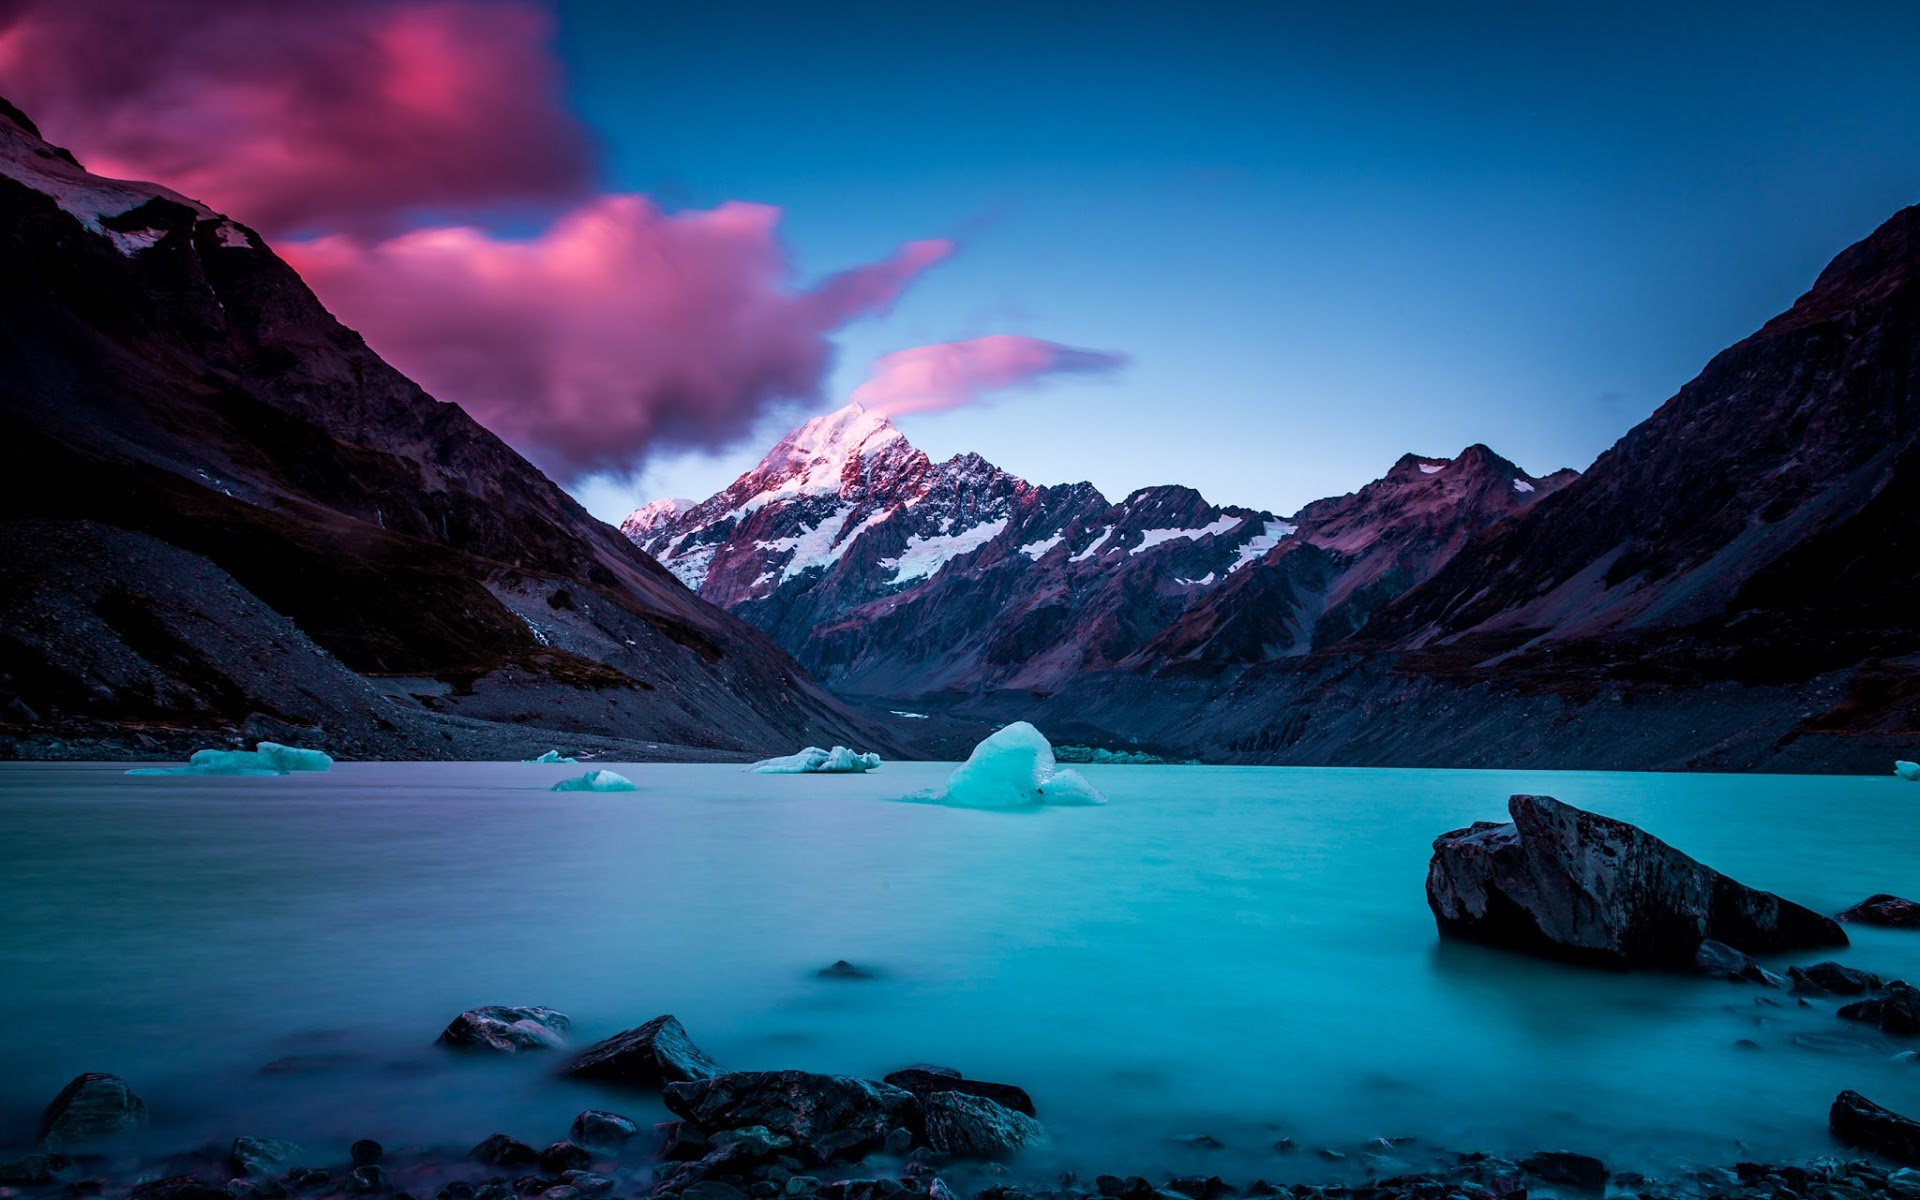 Pink Clouds Over Icy Lake In The Mountains Hd Wallpaper Background